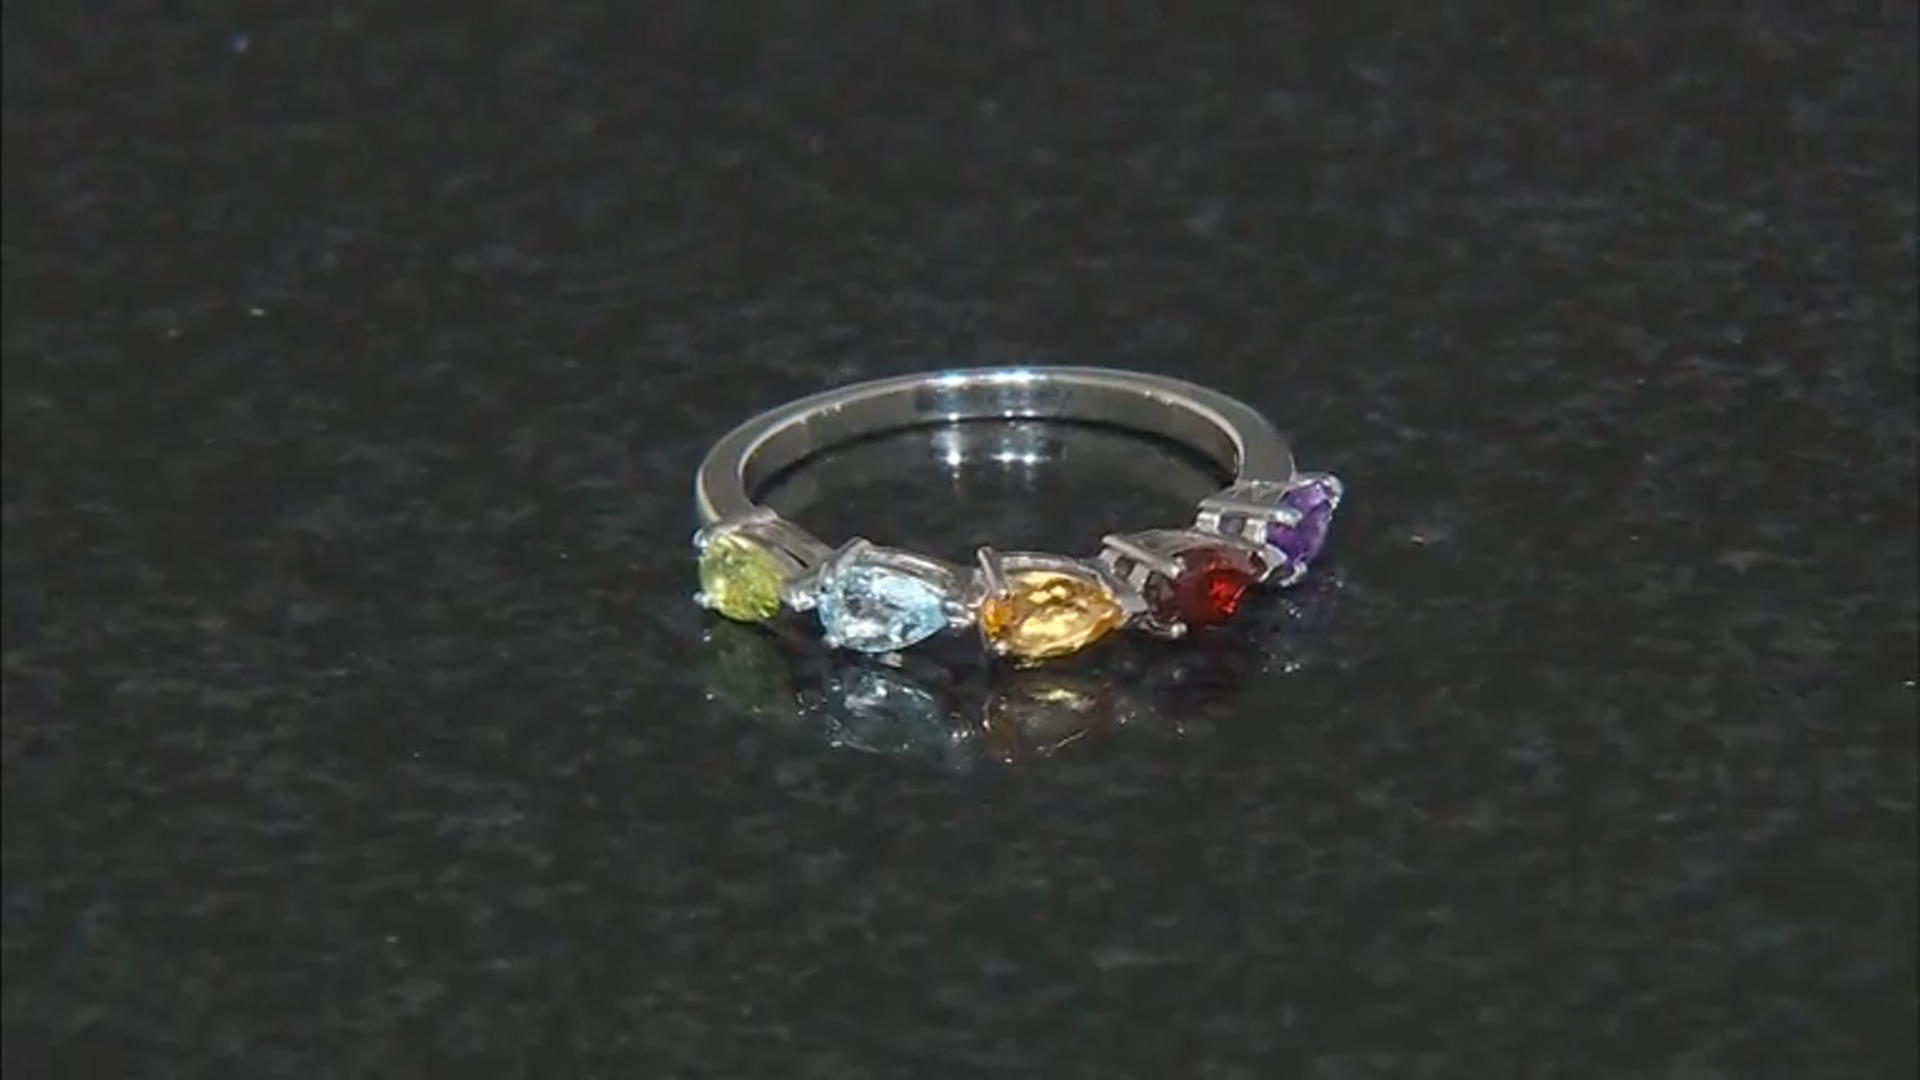 Multi-Gem Rhodium Over Sterling Silver Band Round 0.92ctw Video Thumbnail